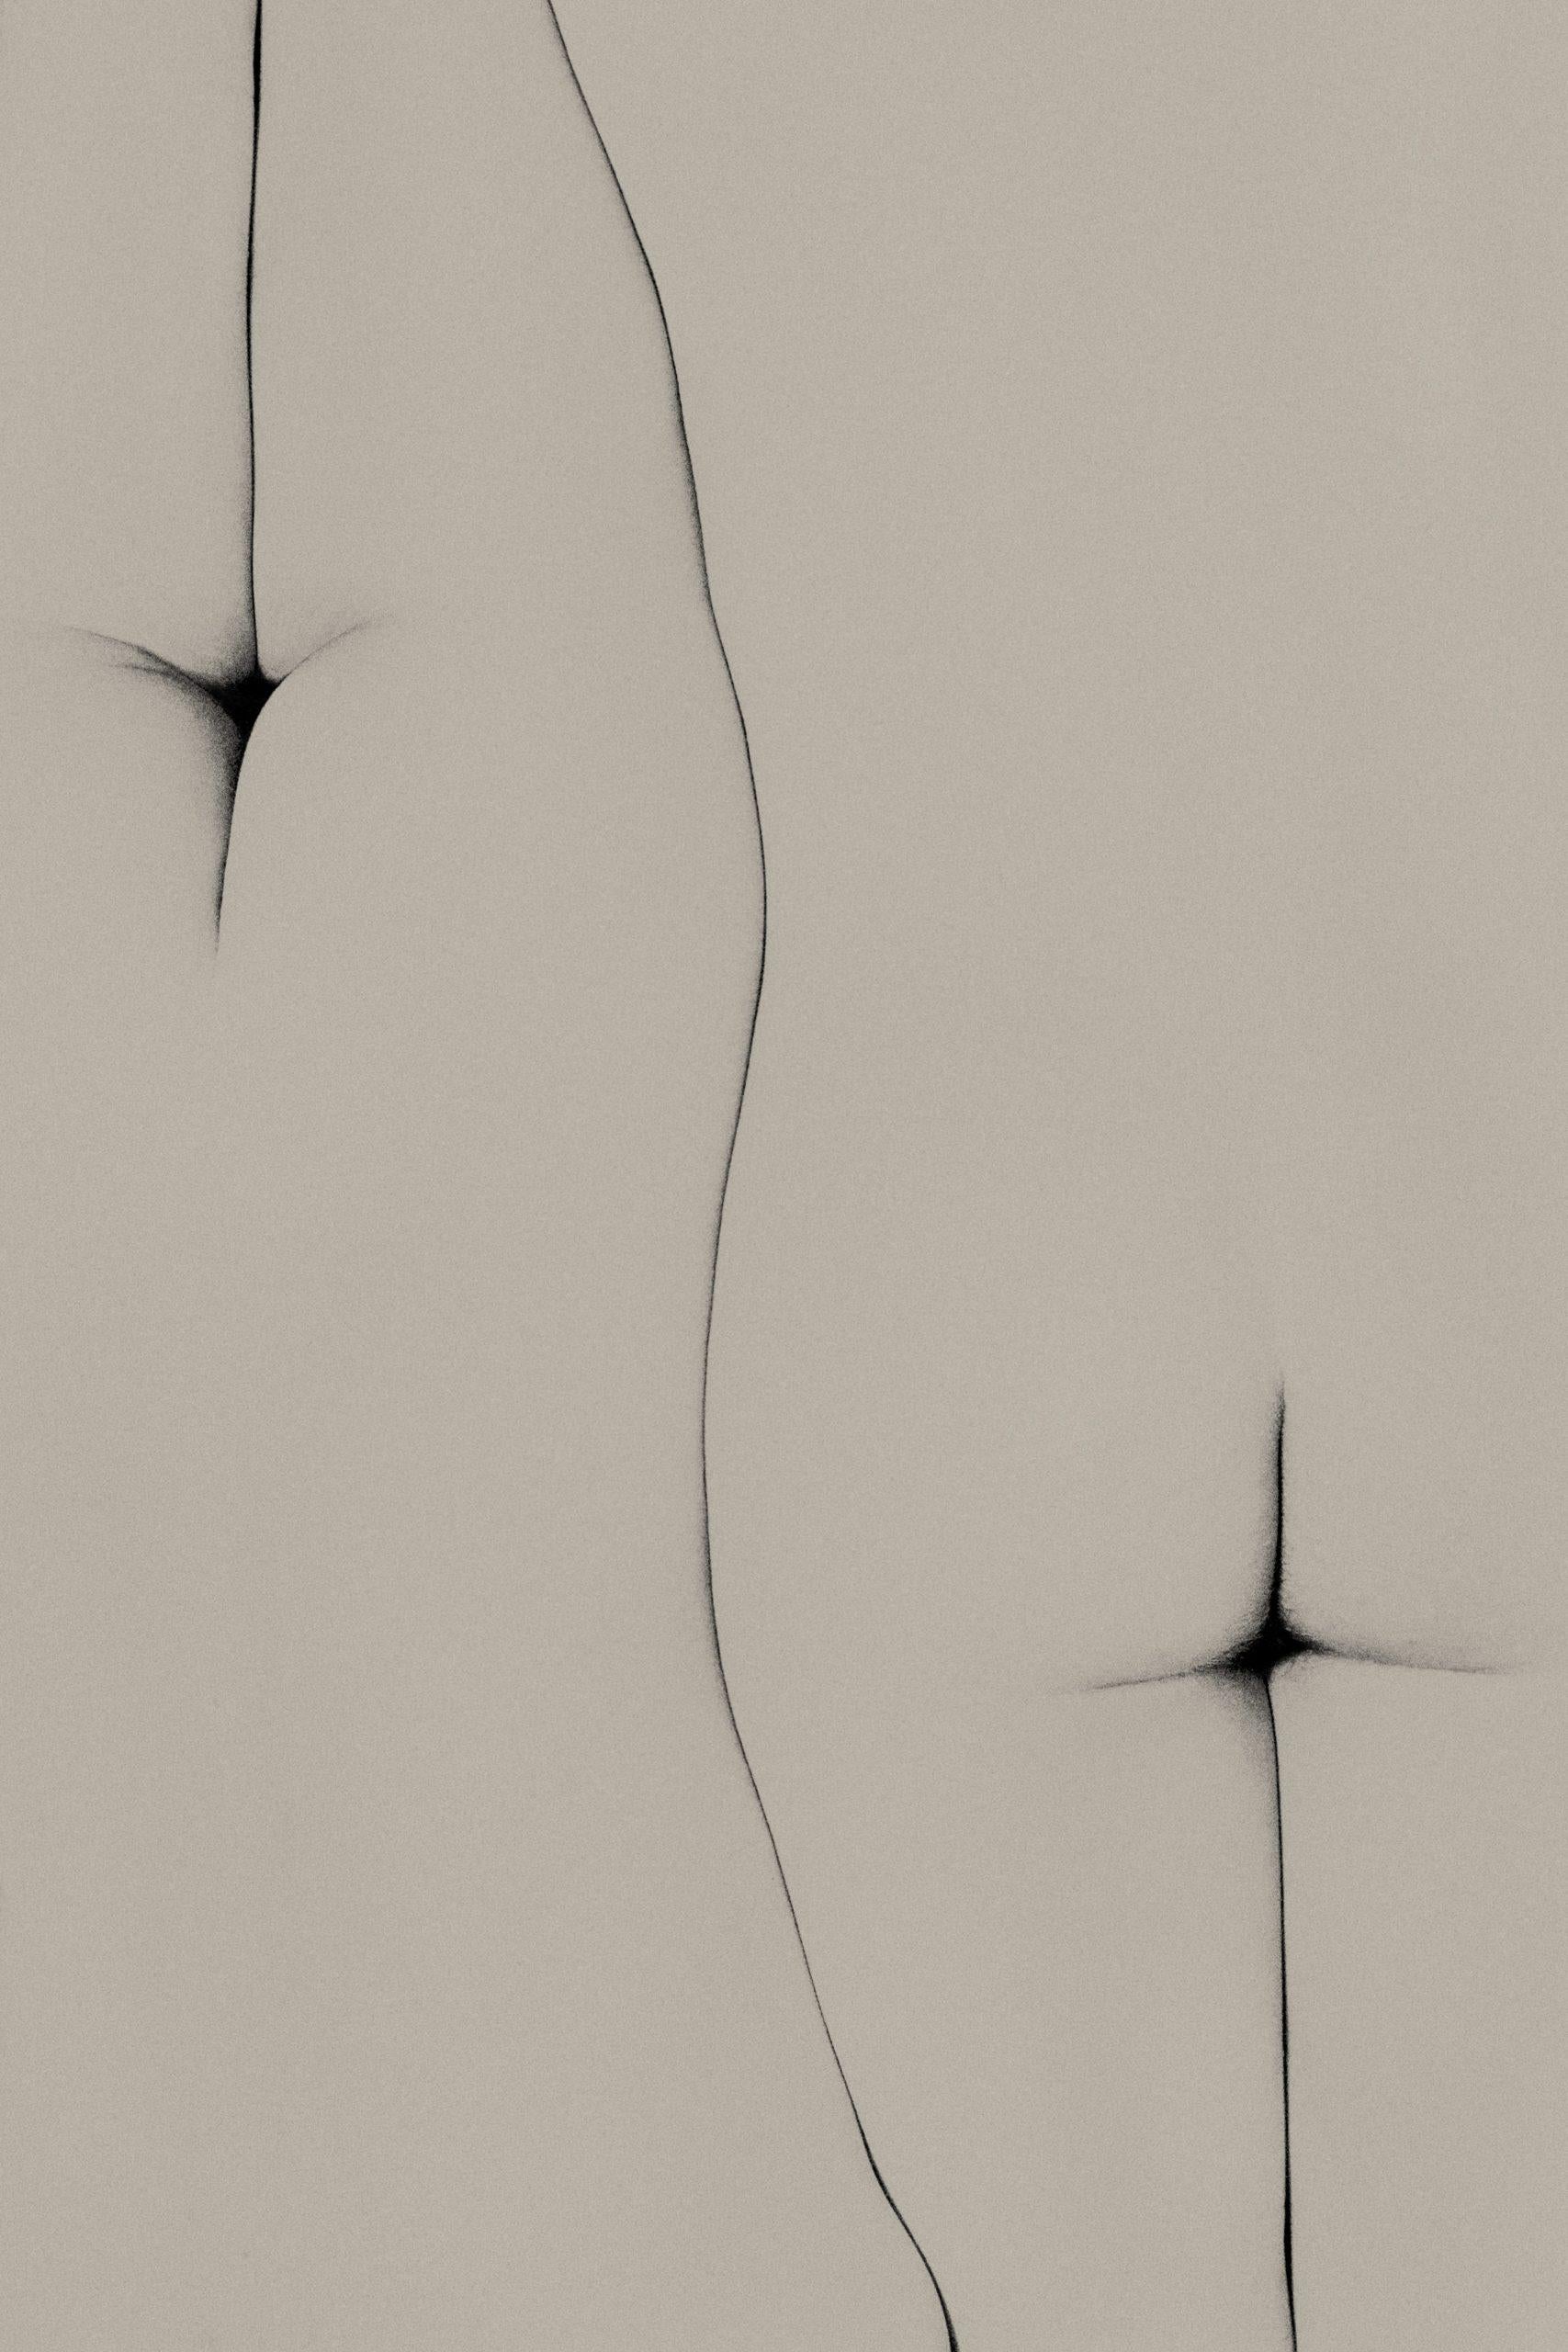 Sara Punt Nude Photograph - Mirrored, Photography, Limited Edition